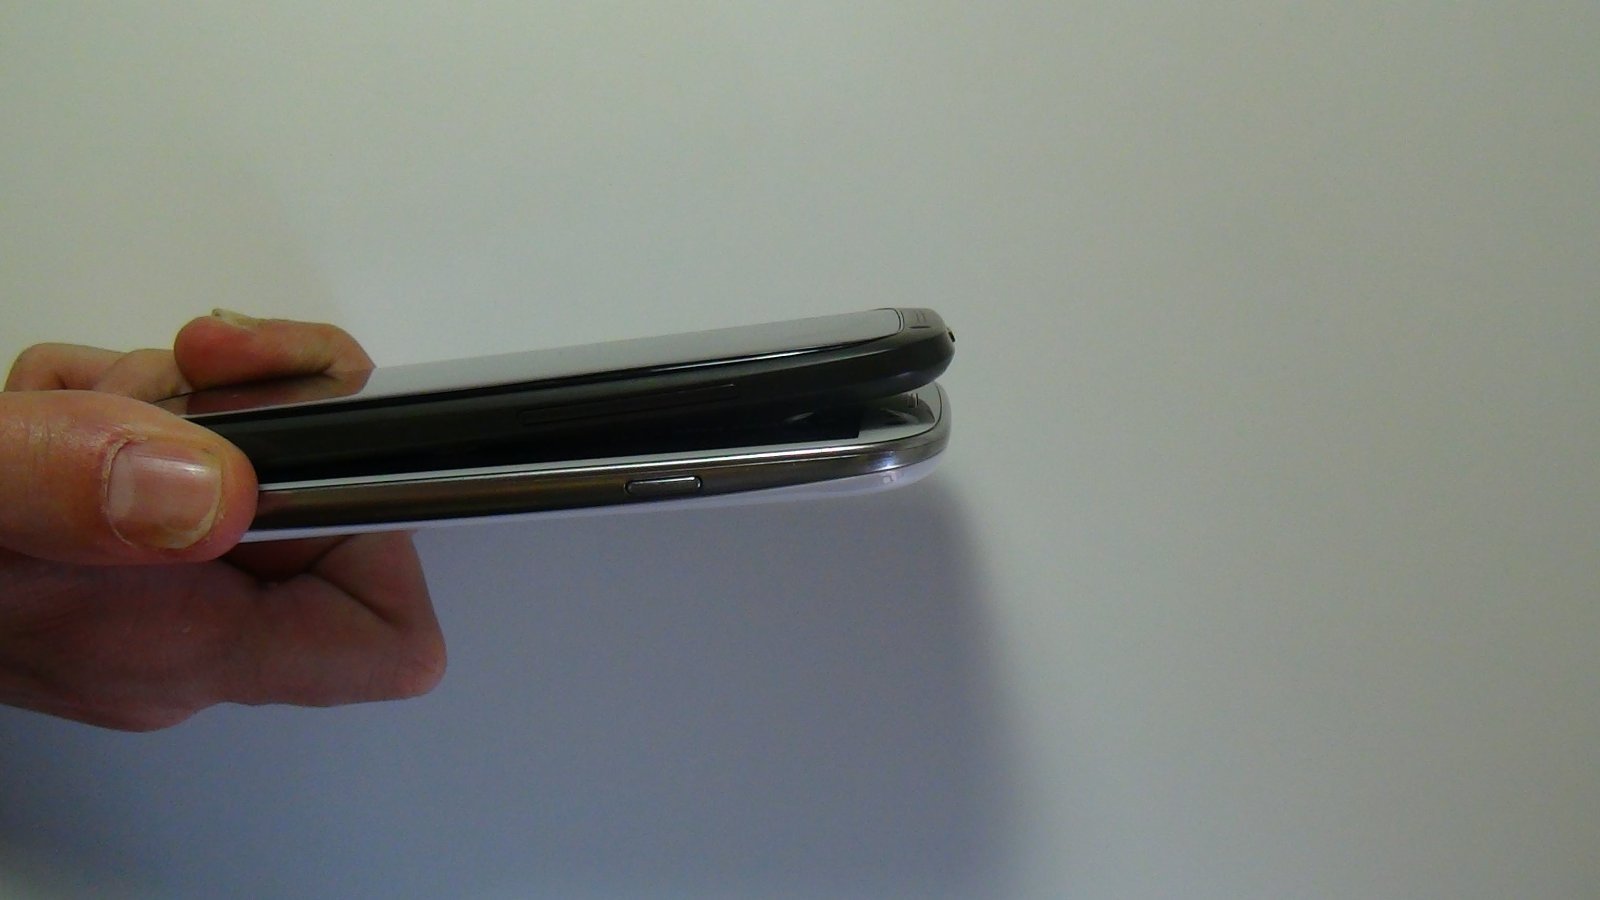 HTC One X vs Samsung Galaxy S III lateral detalle